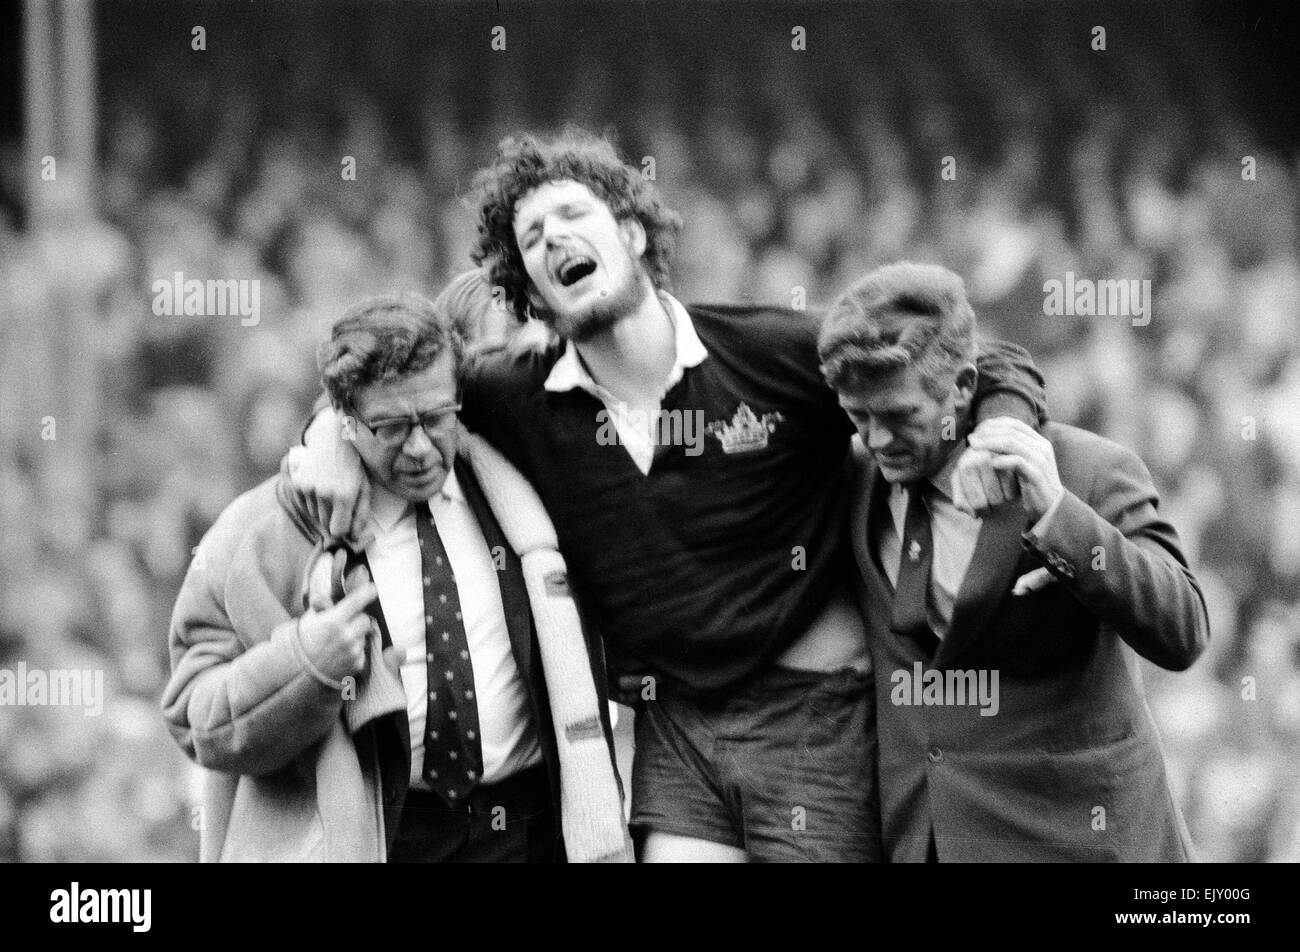 Varsity match between Oxford and Cambridge at Twickenham. J.M   Hutchinson of Oxford is taken off injured.  12th December 1972. Stock Photo